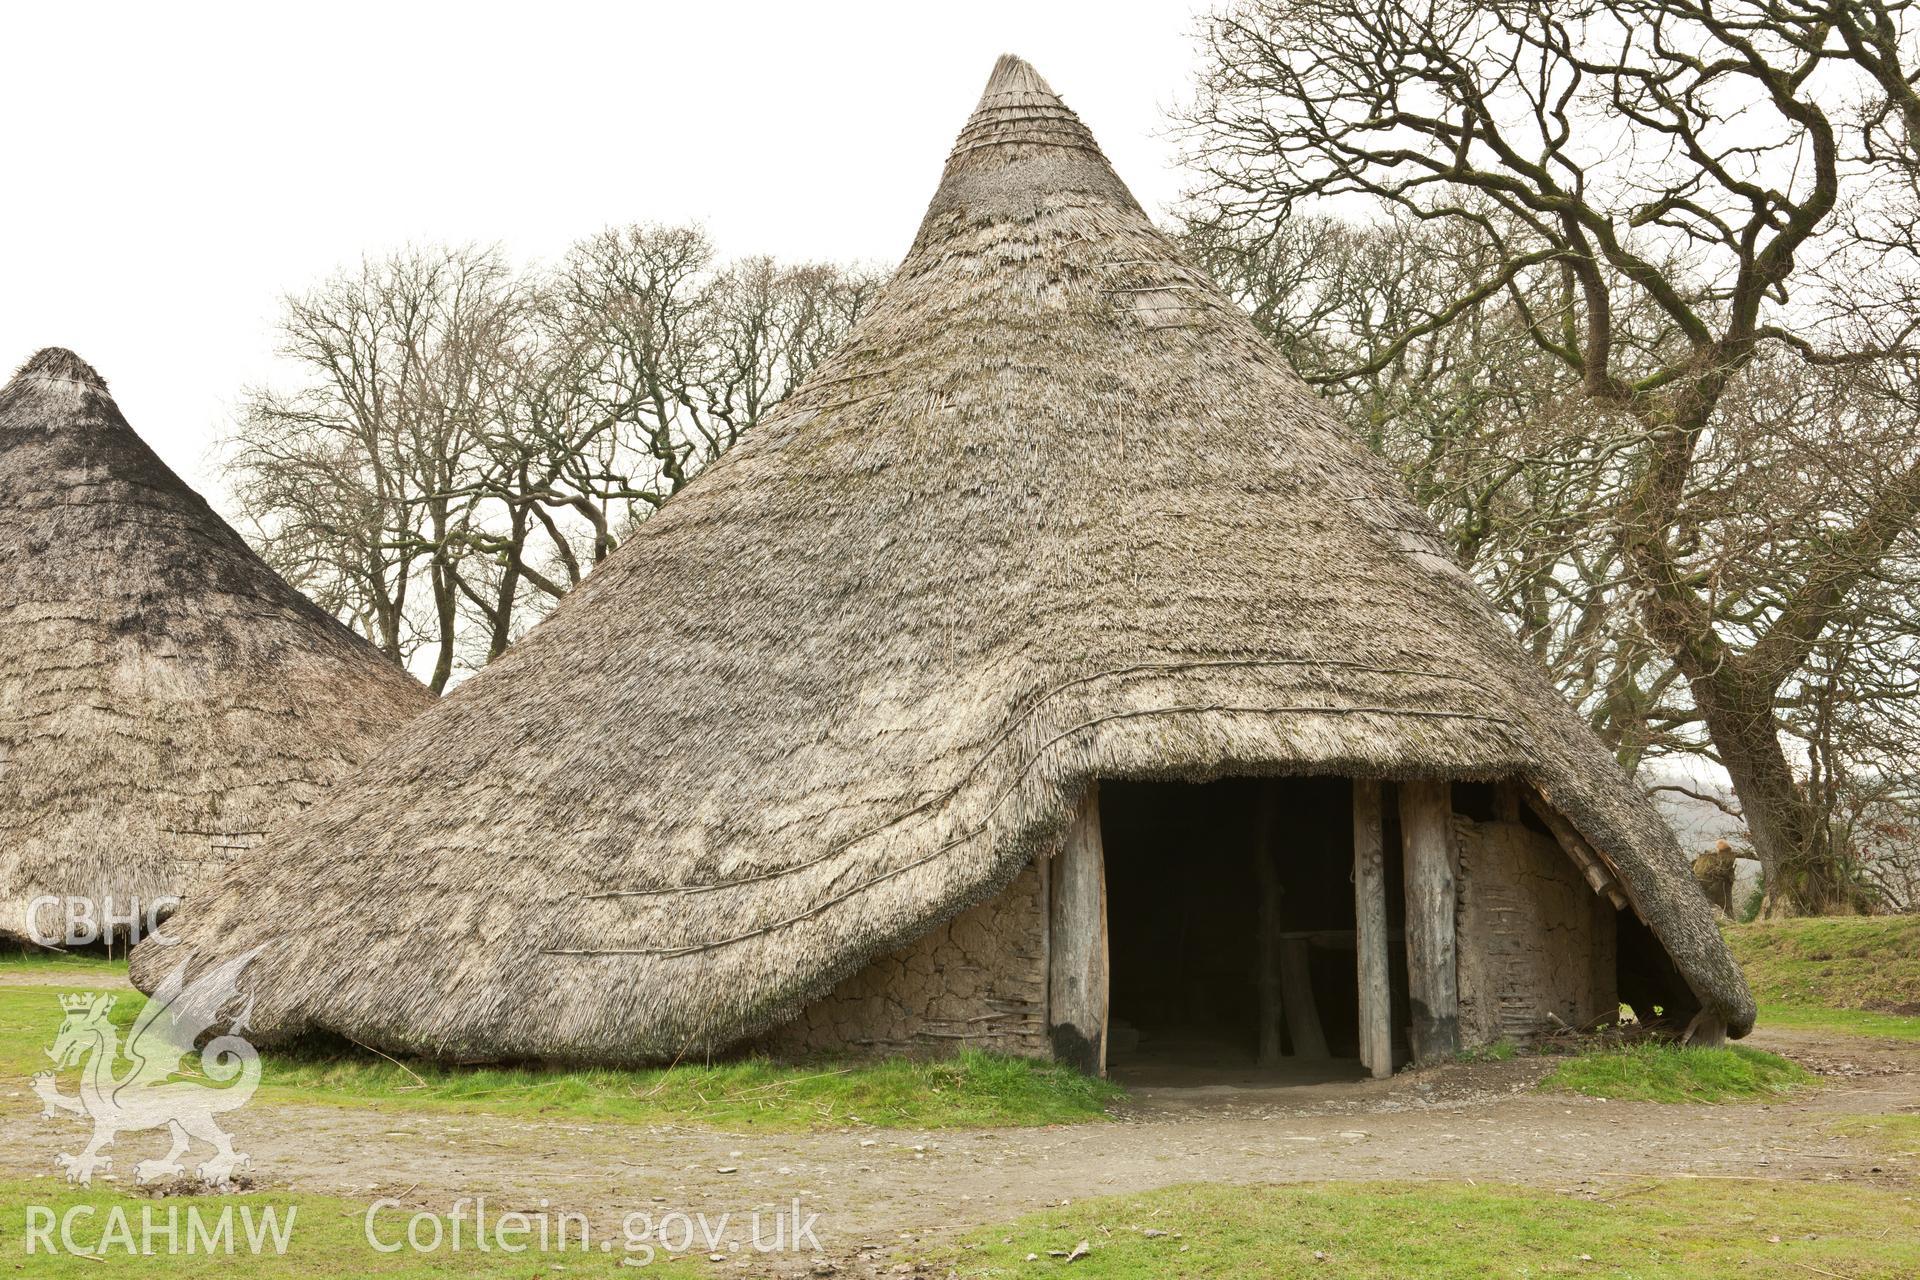 Cookhouse from the southeast. Castell Henllys, Iain Wright 17/01/2012